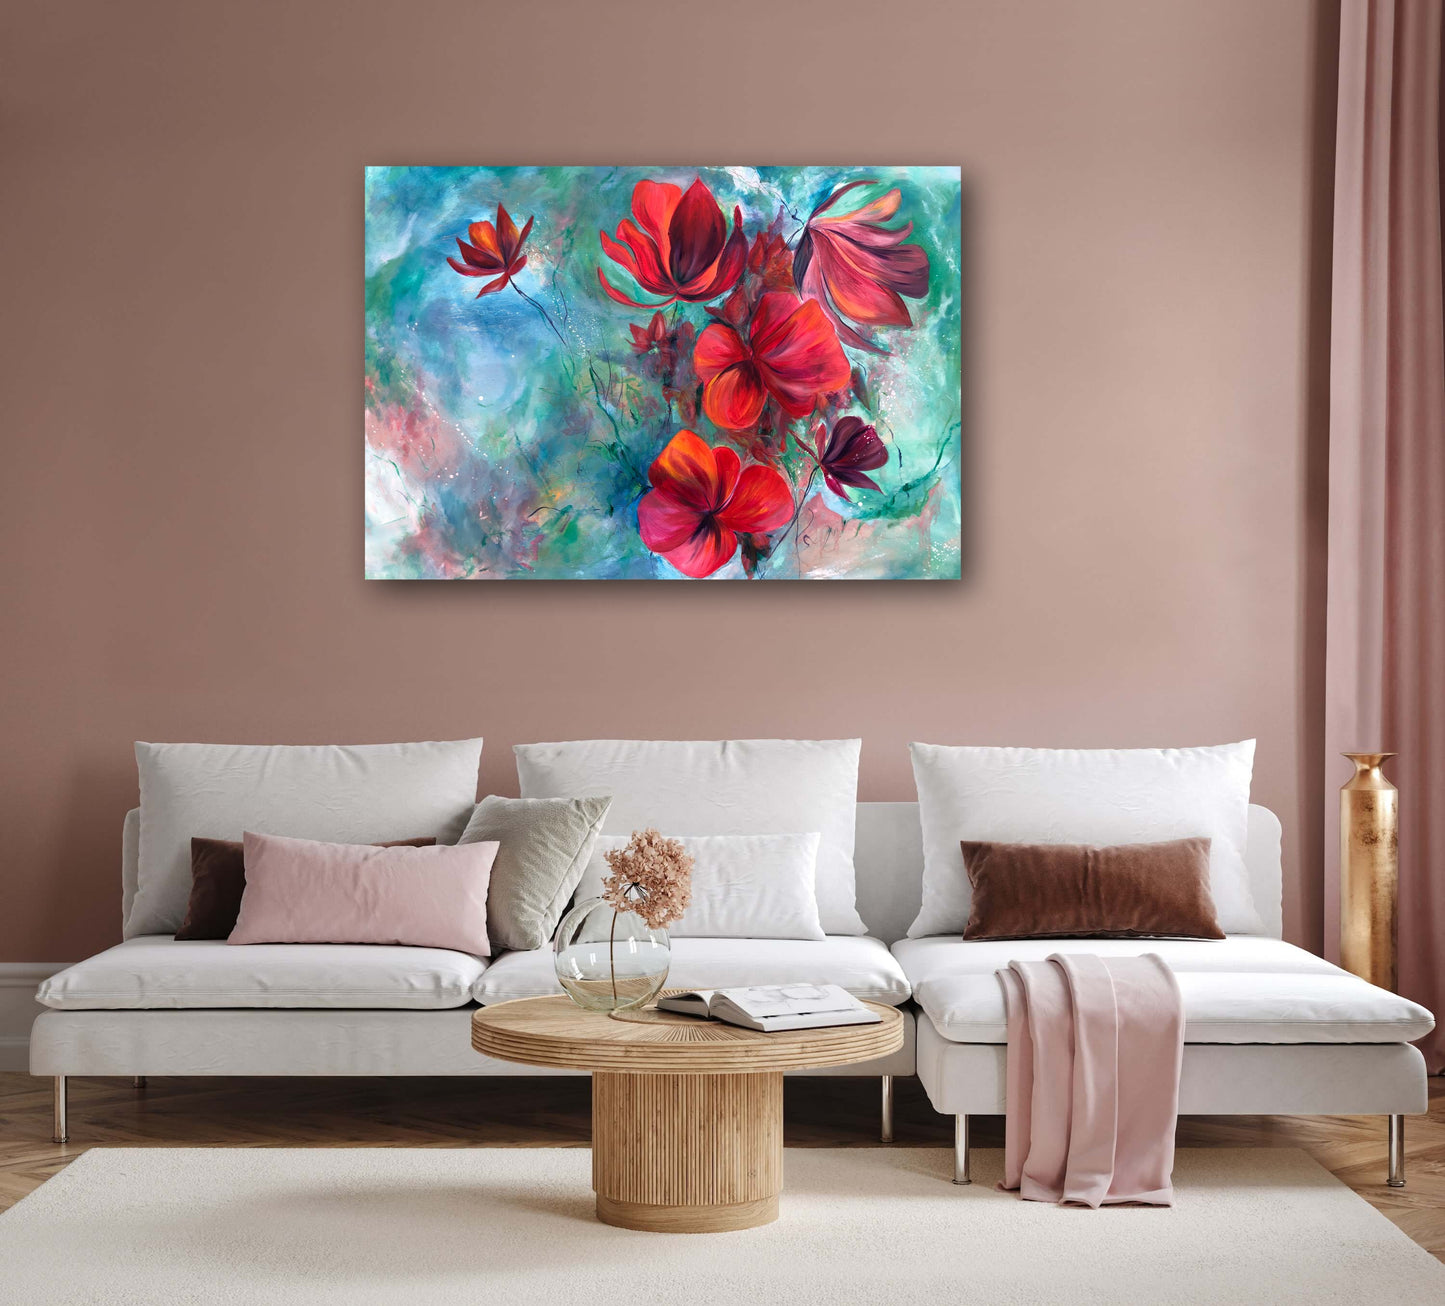 Large abstract floral canvas painting displayed against a dusky pink wall above a contemporary white sofa